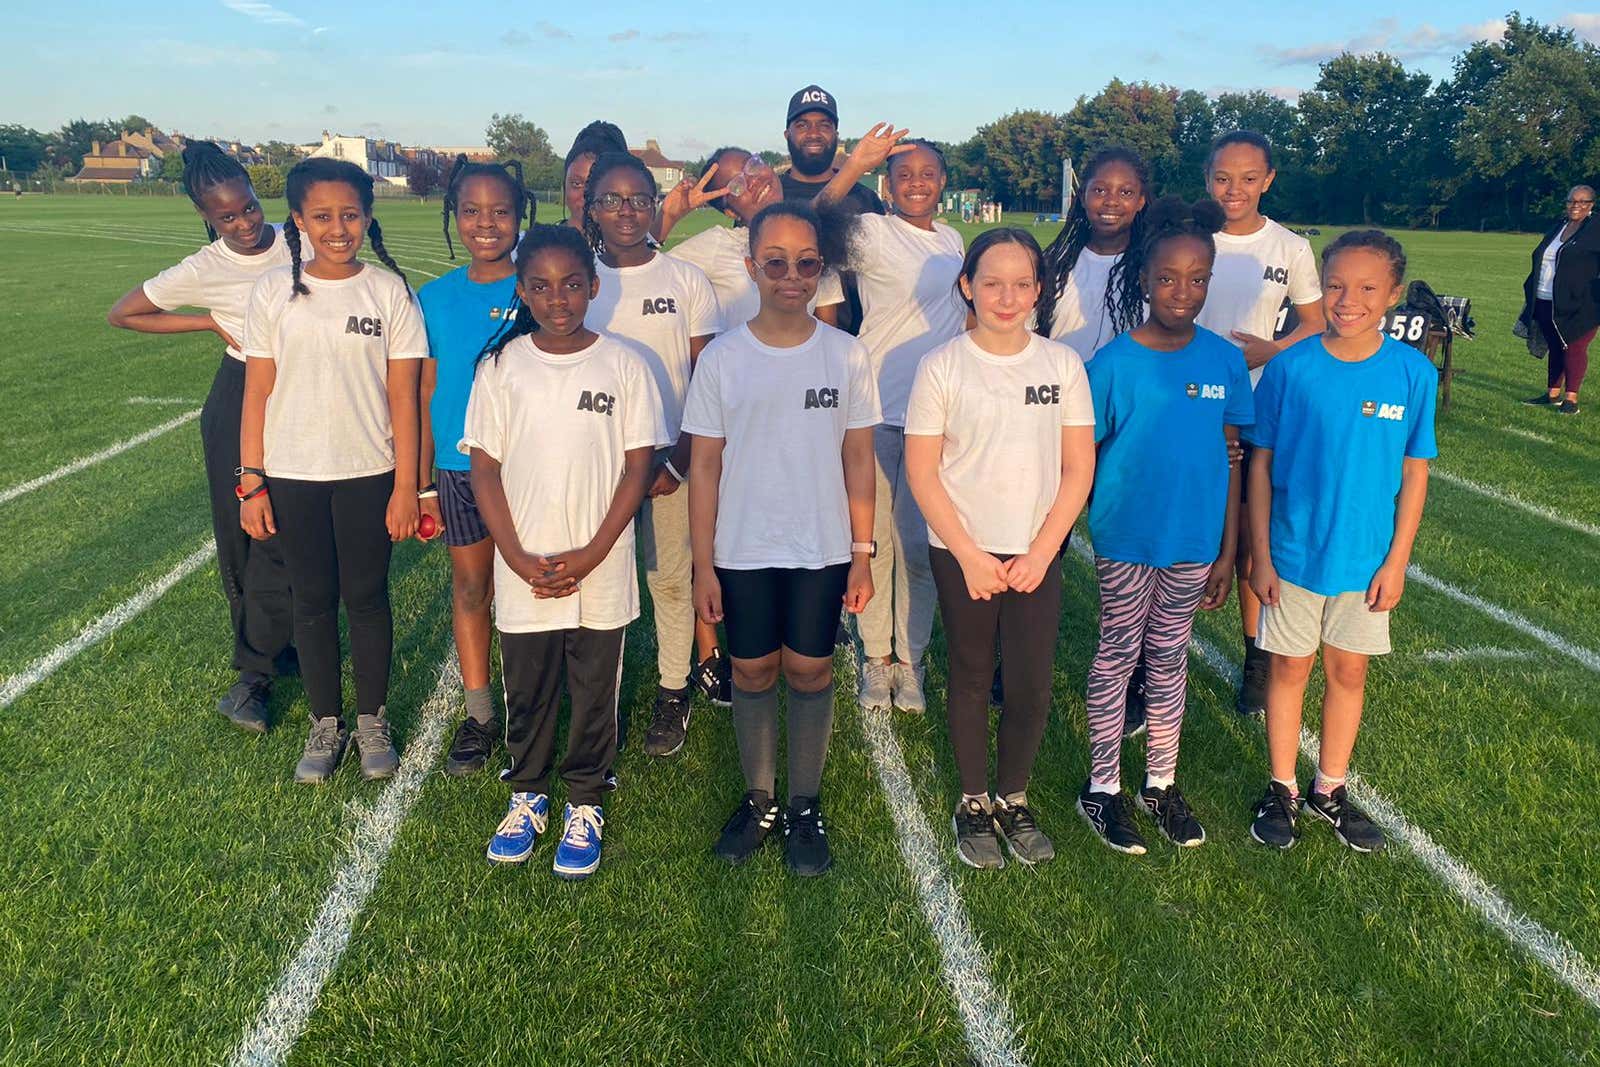 Young black cricketers in the north are set to receive unprecedented development opportunities (Yorkshire Cricket Foundation)